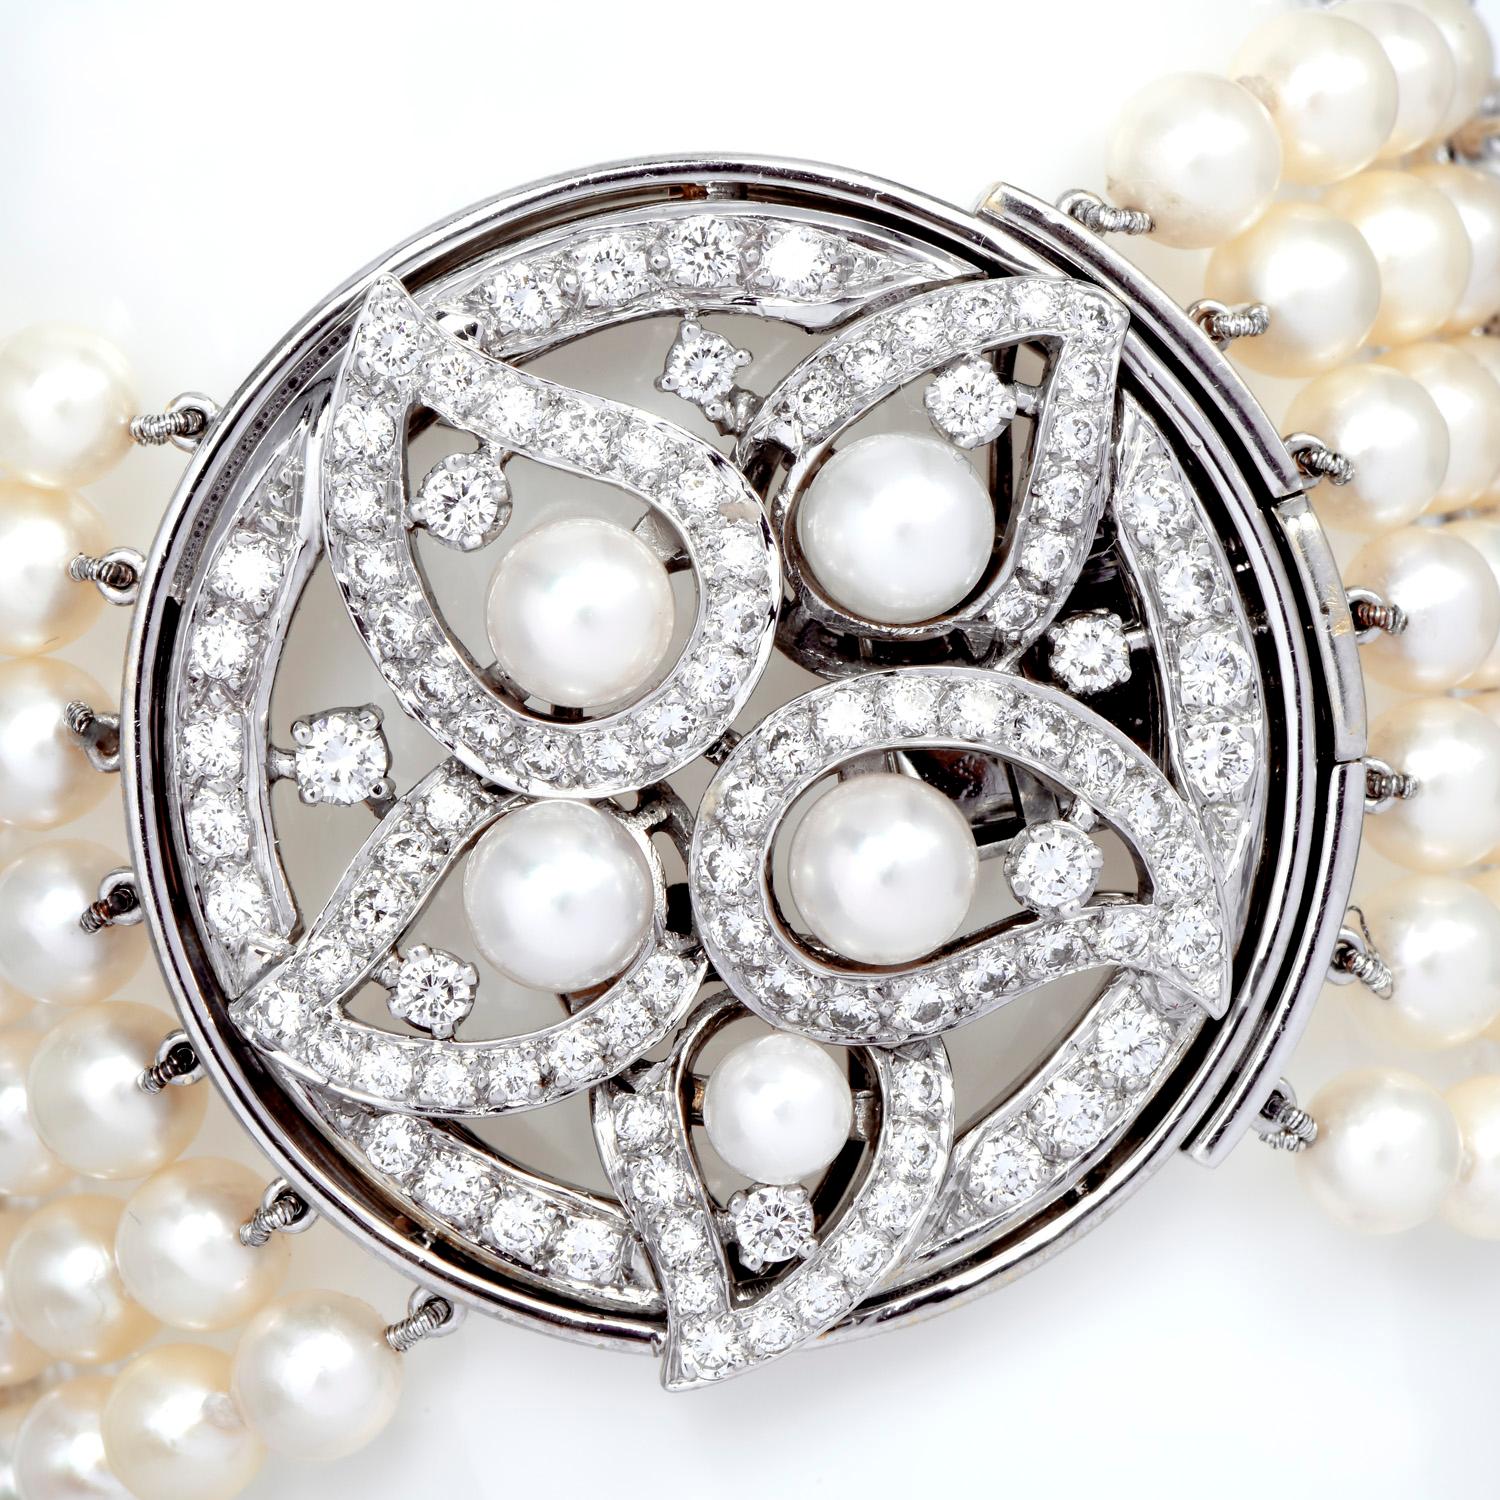 Luxurious & elegant pearl & diamond wide bracelet, made of 7 strands of 6.5 mm Akoya pearls with cream undertones, high luster, and minor blemishes.

This piece was created by the Designer Ella Gafter from New York, with a large diamond accented